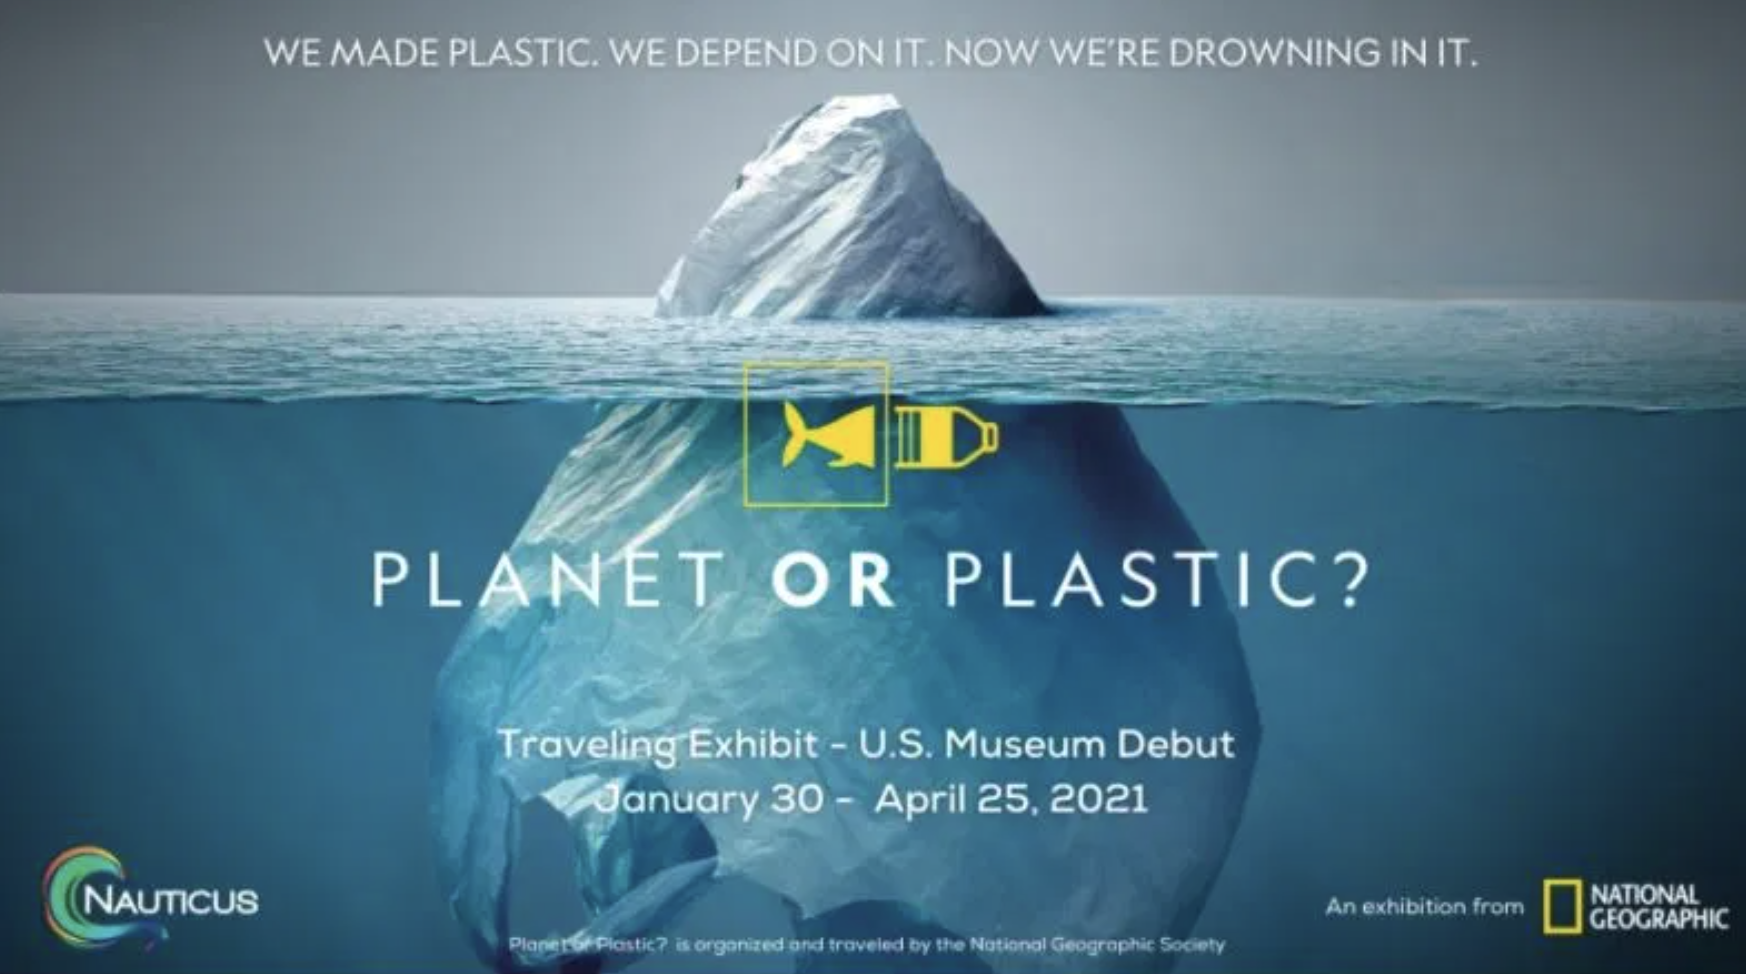 Planet or Plastic? an exhibition from National Geographic at Nauticus